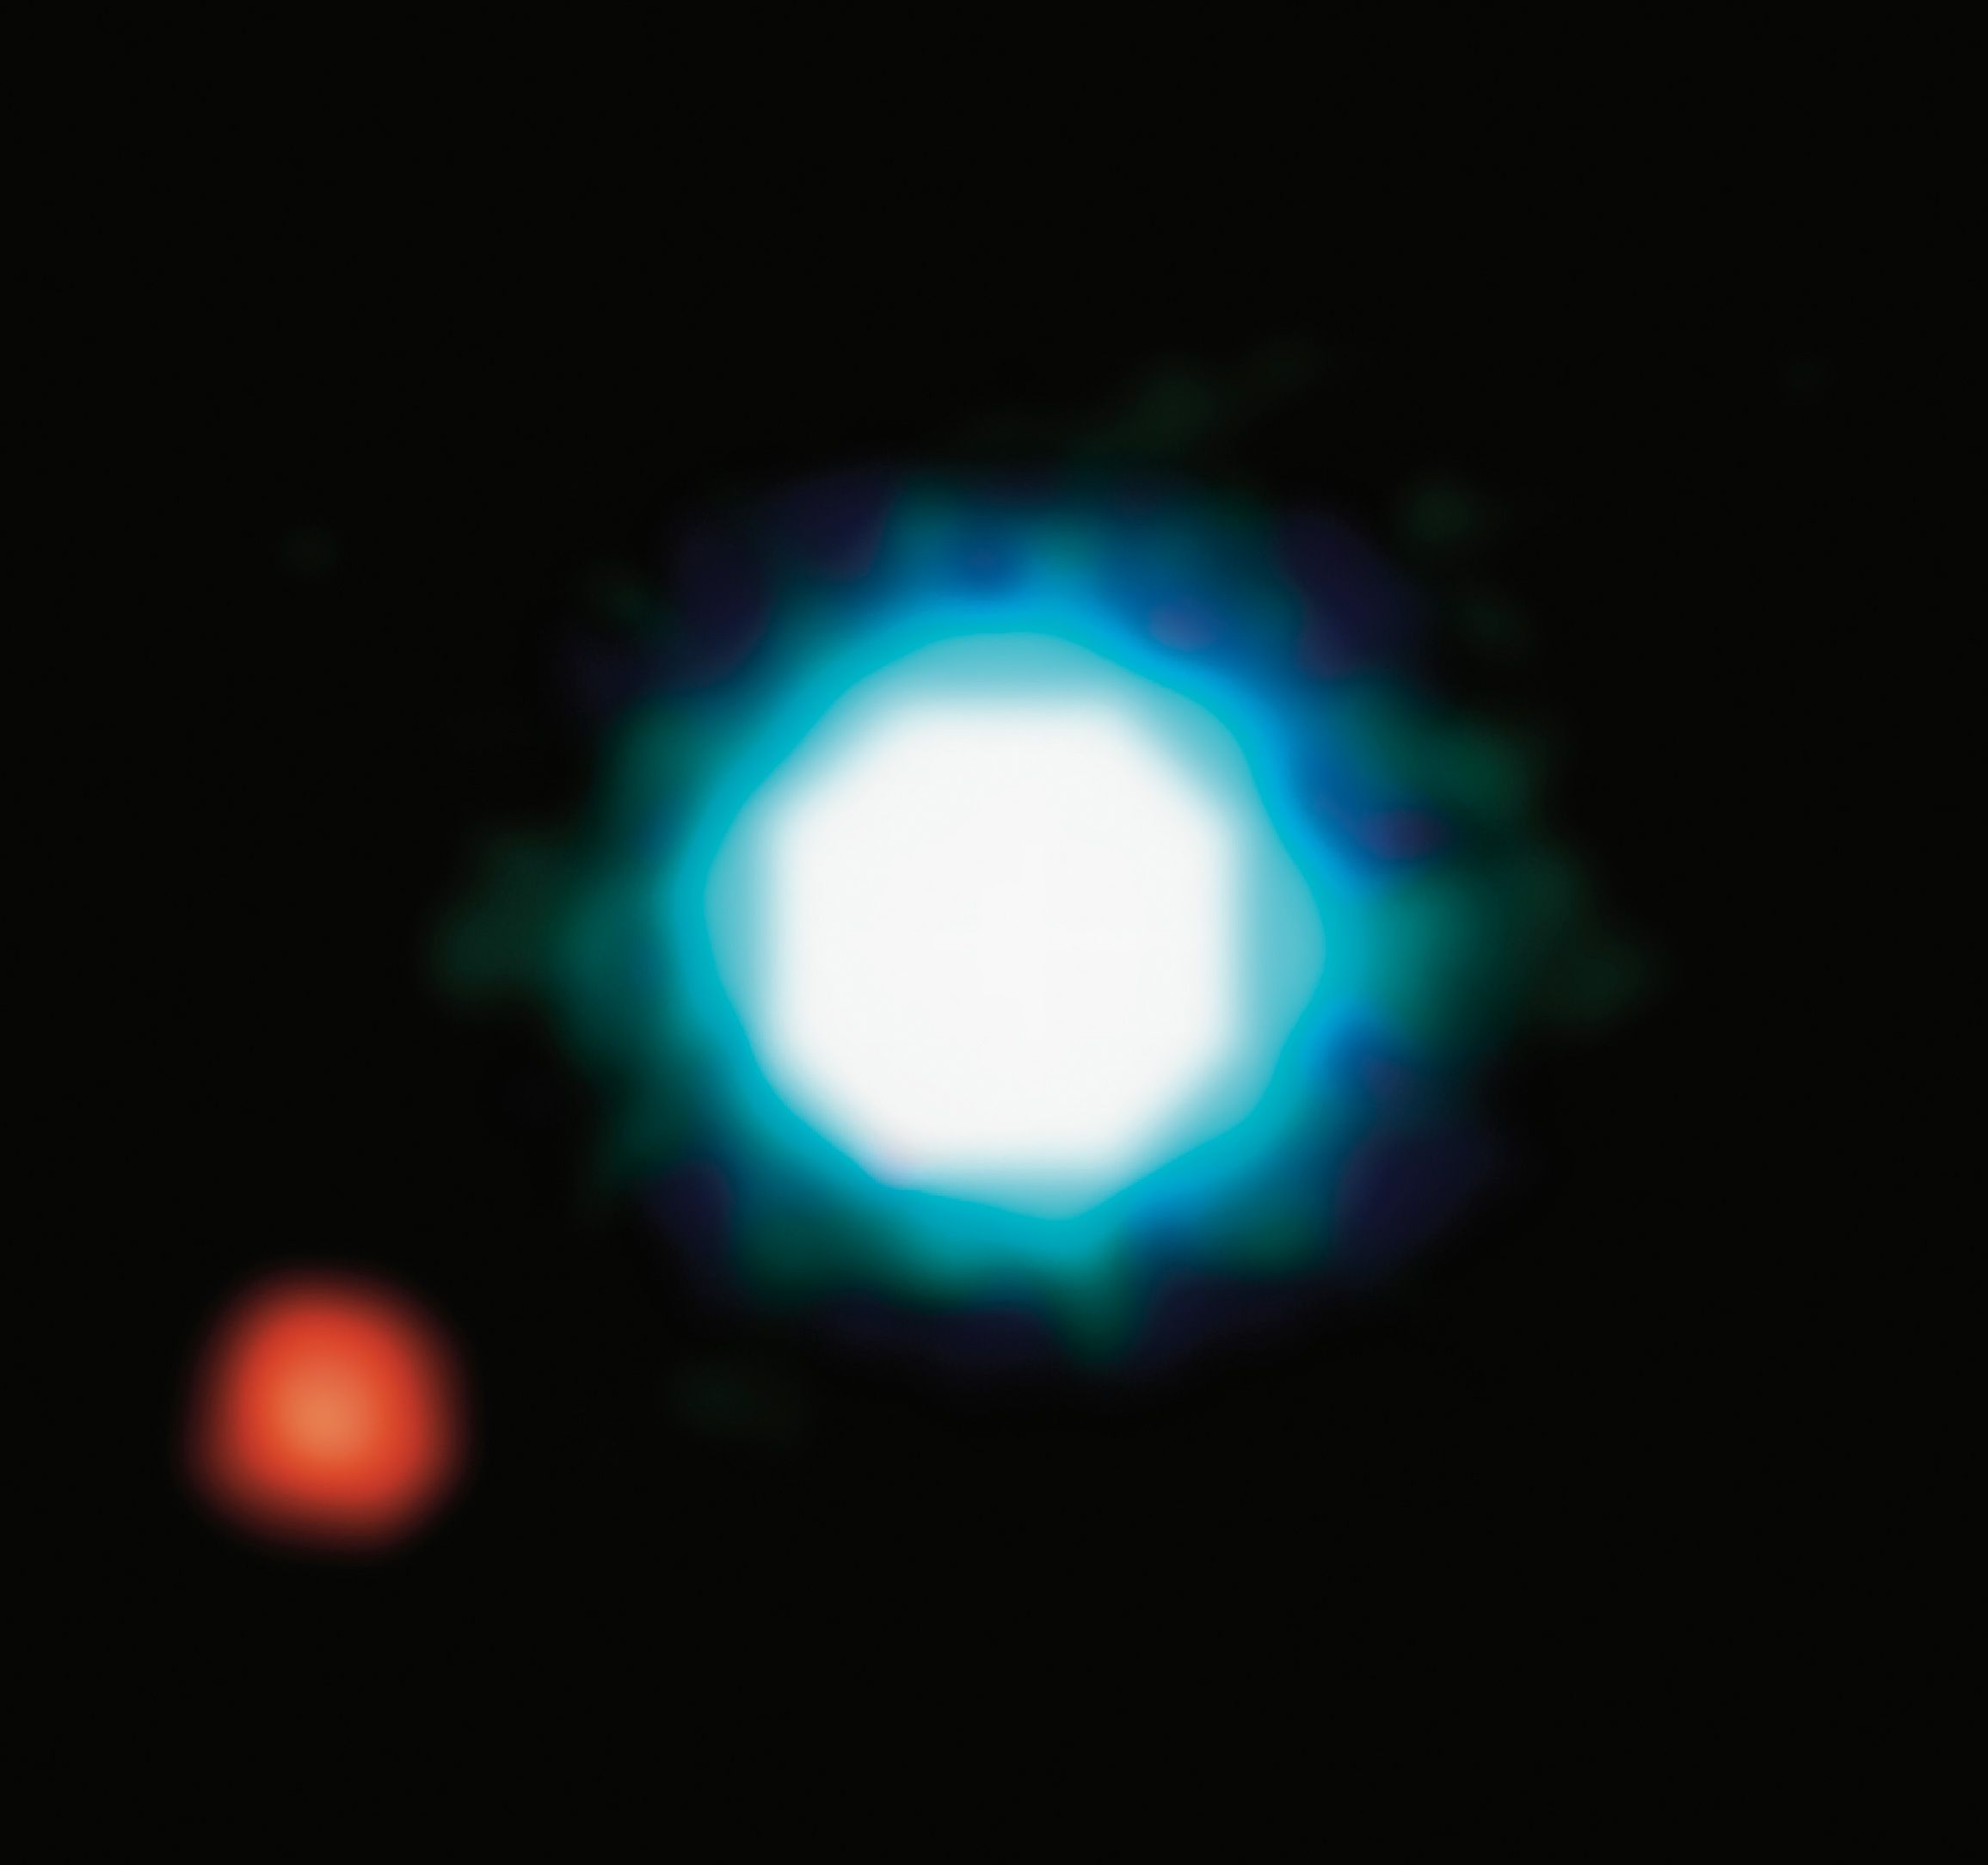 Image Archive: Exoplanets